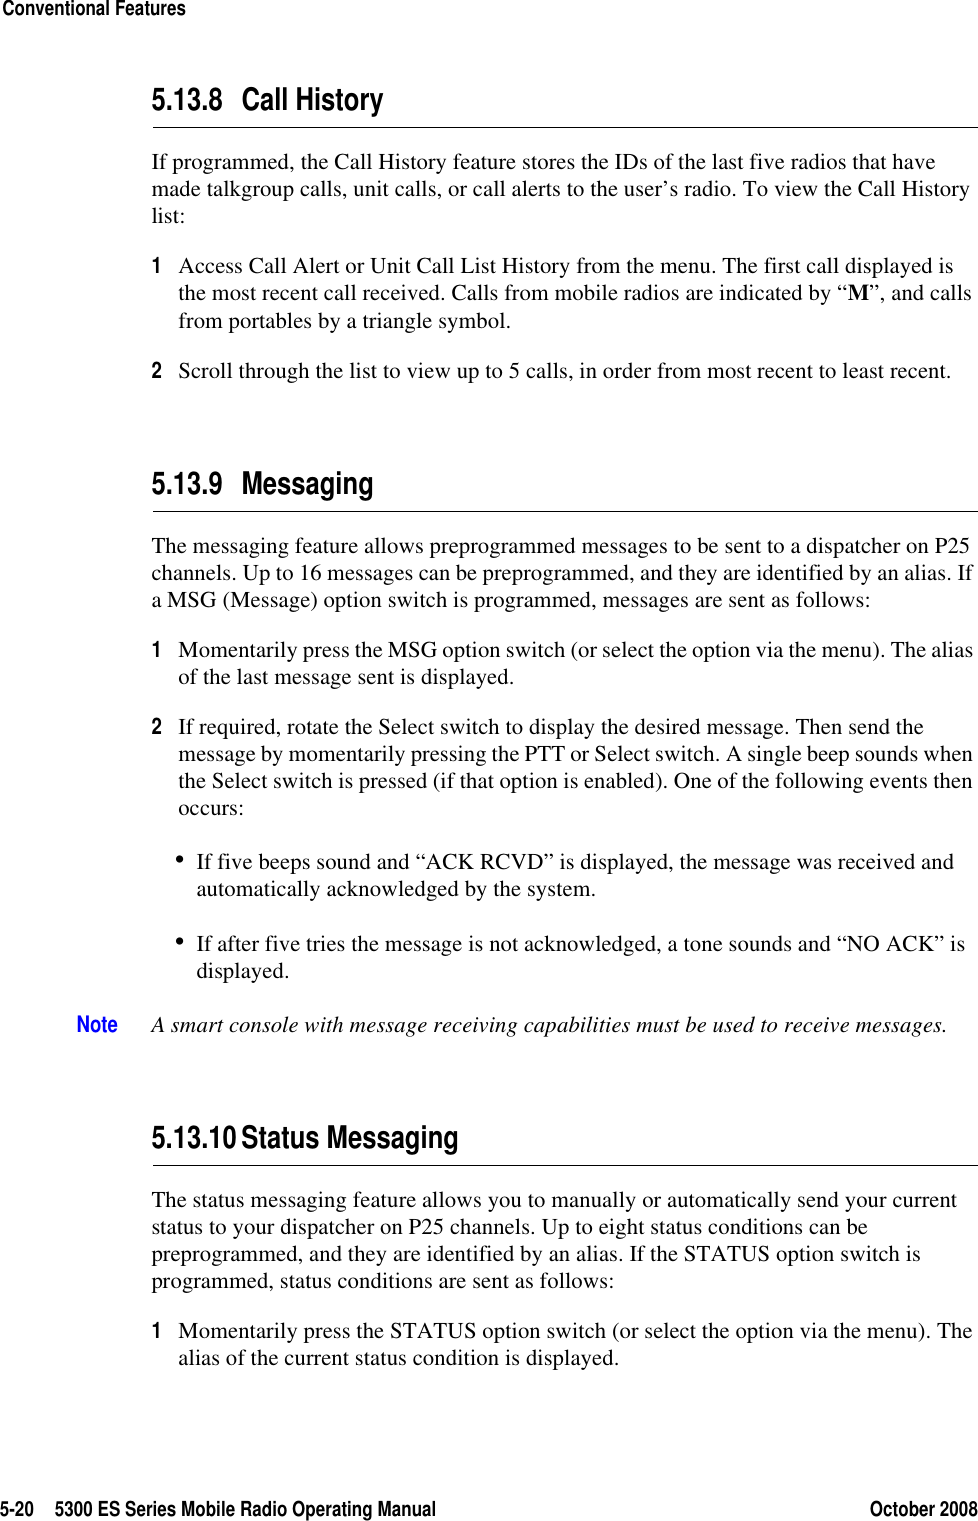 5-20 5300 ES Series Mobile Radio Operating Manual October 2008Conventional Features5.13.8 Call HistoryIf programmed, the Call History feature stores the IDs of the last five radios that have made talkgroup calls, unit calls, or call alerts to the user’s radio. To view the Call History list:1Access Call Alert or Unit Call List History from the menu. The first call displayed is the most recent call received. Calls from mobile radios are indicated by “M”, and calls from portables by a triangle symbol.2Scroll through the list to view up to 5 calls, in order from most recent to least recent.5.13.9 MessagingThe messaging feature allows preprogrammed messages to be sent to a dispatcher on P25 channels. Up to 16 messages can be preprogrammed, and they are identified by an alias. If a MSG (Message) option switch is programmed, messages are sent as follows:1Momentarily press the MSG option switch (or select the option via the menu). The alias of the last message sent is displayed.2If required, rotate the Select switch to display the desired message. Then send the message by momentarily pressing the PTT or Select switch. A single beep sounds when the Select switch is pressed (if that option is enabled). One of the following events then occurs:•If five beeps sound and “ACK RCVD” is displayed, the message was received and automatically acknowledged by the system.•If after five tries the message is not acknowledged, a tone sounds and “NO ACK” is displayed.Note A smart console with message receiving capabilities must be used to receive messages.5.13.10Status MessagingThe status messaging feature allows you to manually or automatically send your current status to your dispatcher on P25 channels. Up to eight status conditions can be preprogrammed, and they are identified by an alias. If the STATUS option switch is programmed, status conditions are sent as follows:1Momentarily press the STATUS option switch (or select the option via the menu). The alias of the current status condition is displayed.